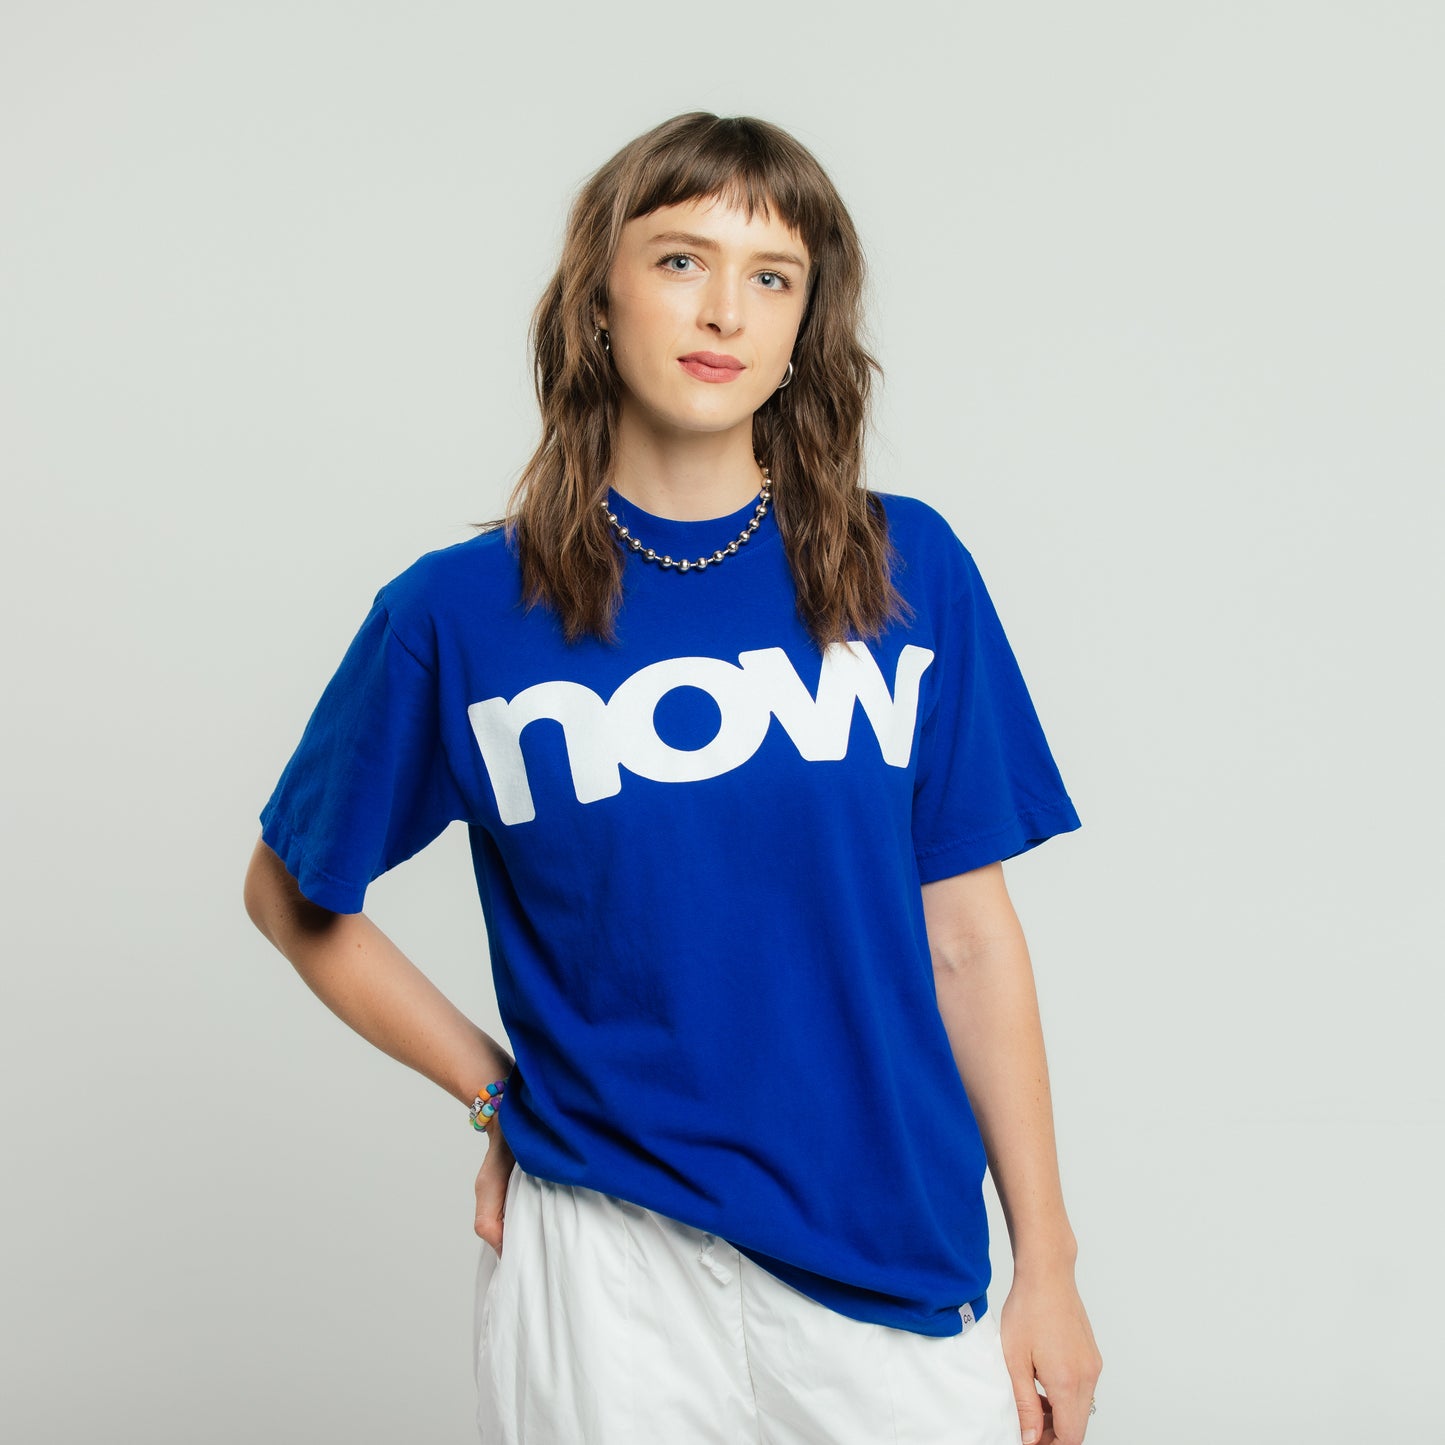 NOW Tees